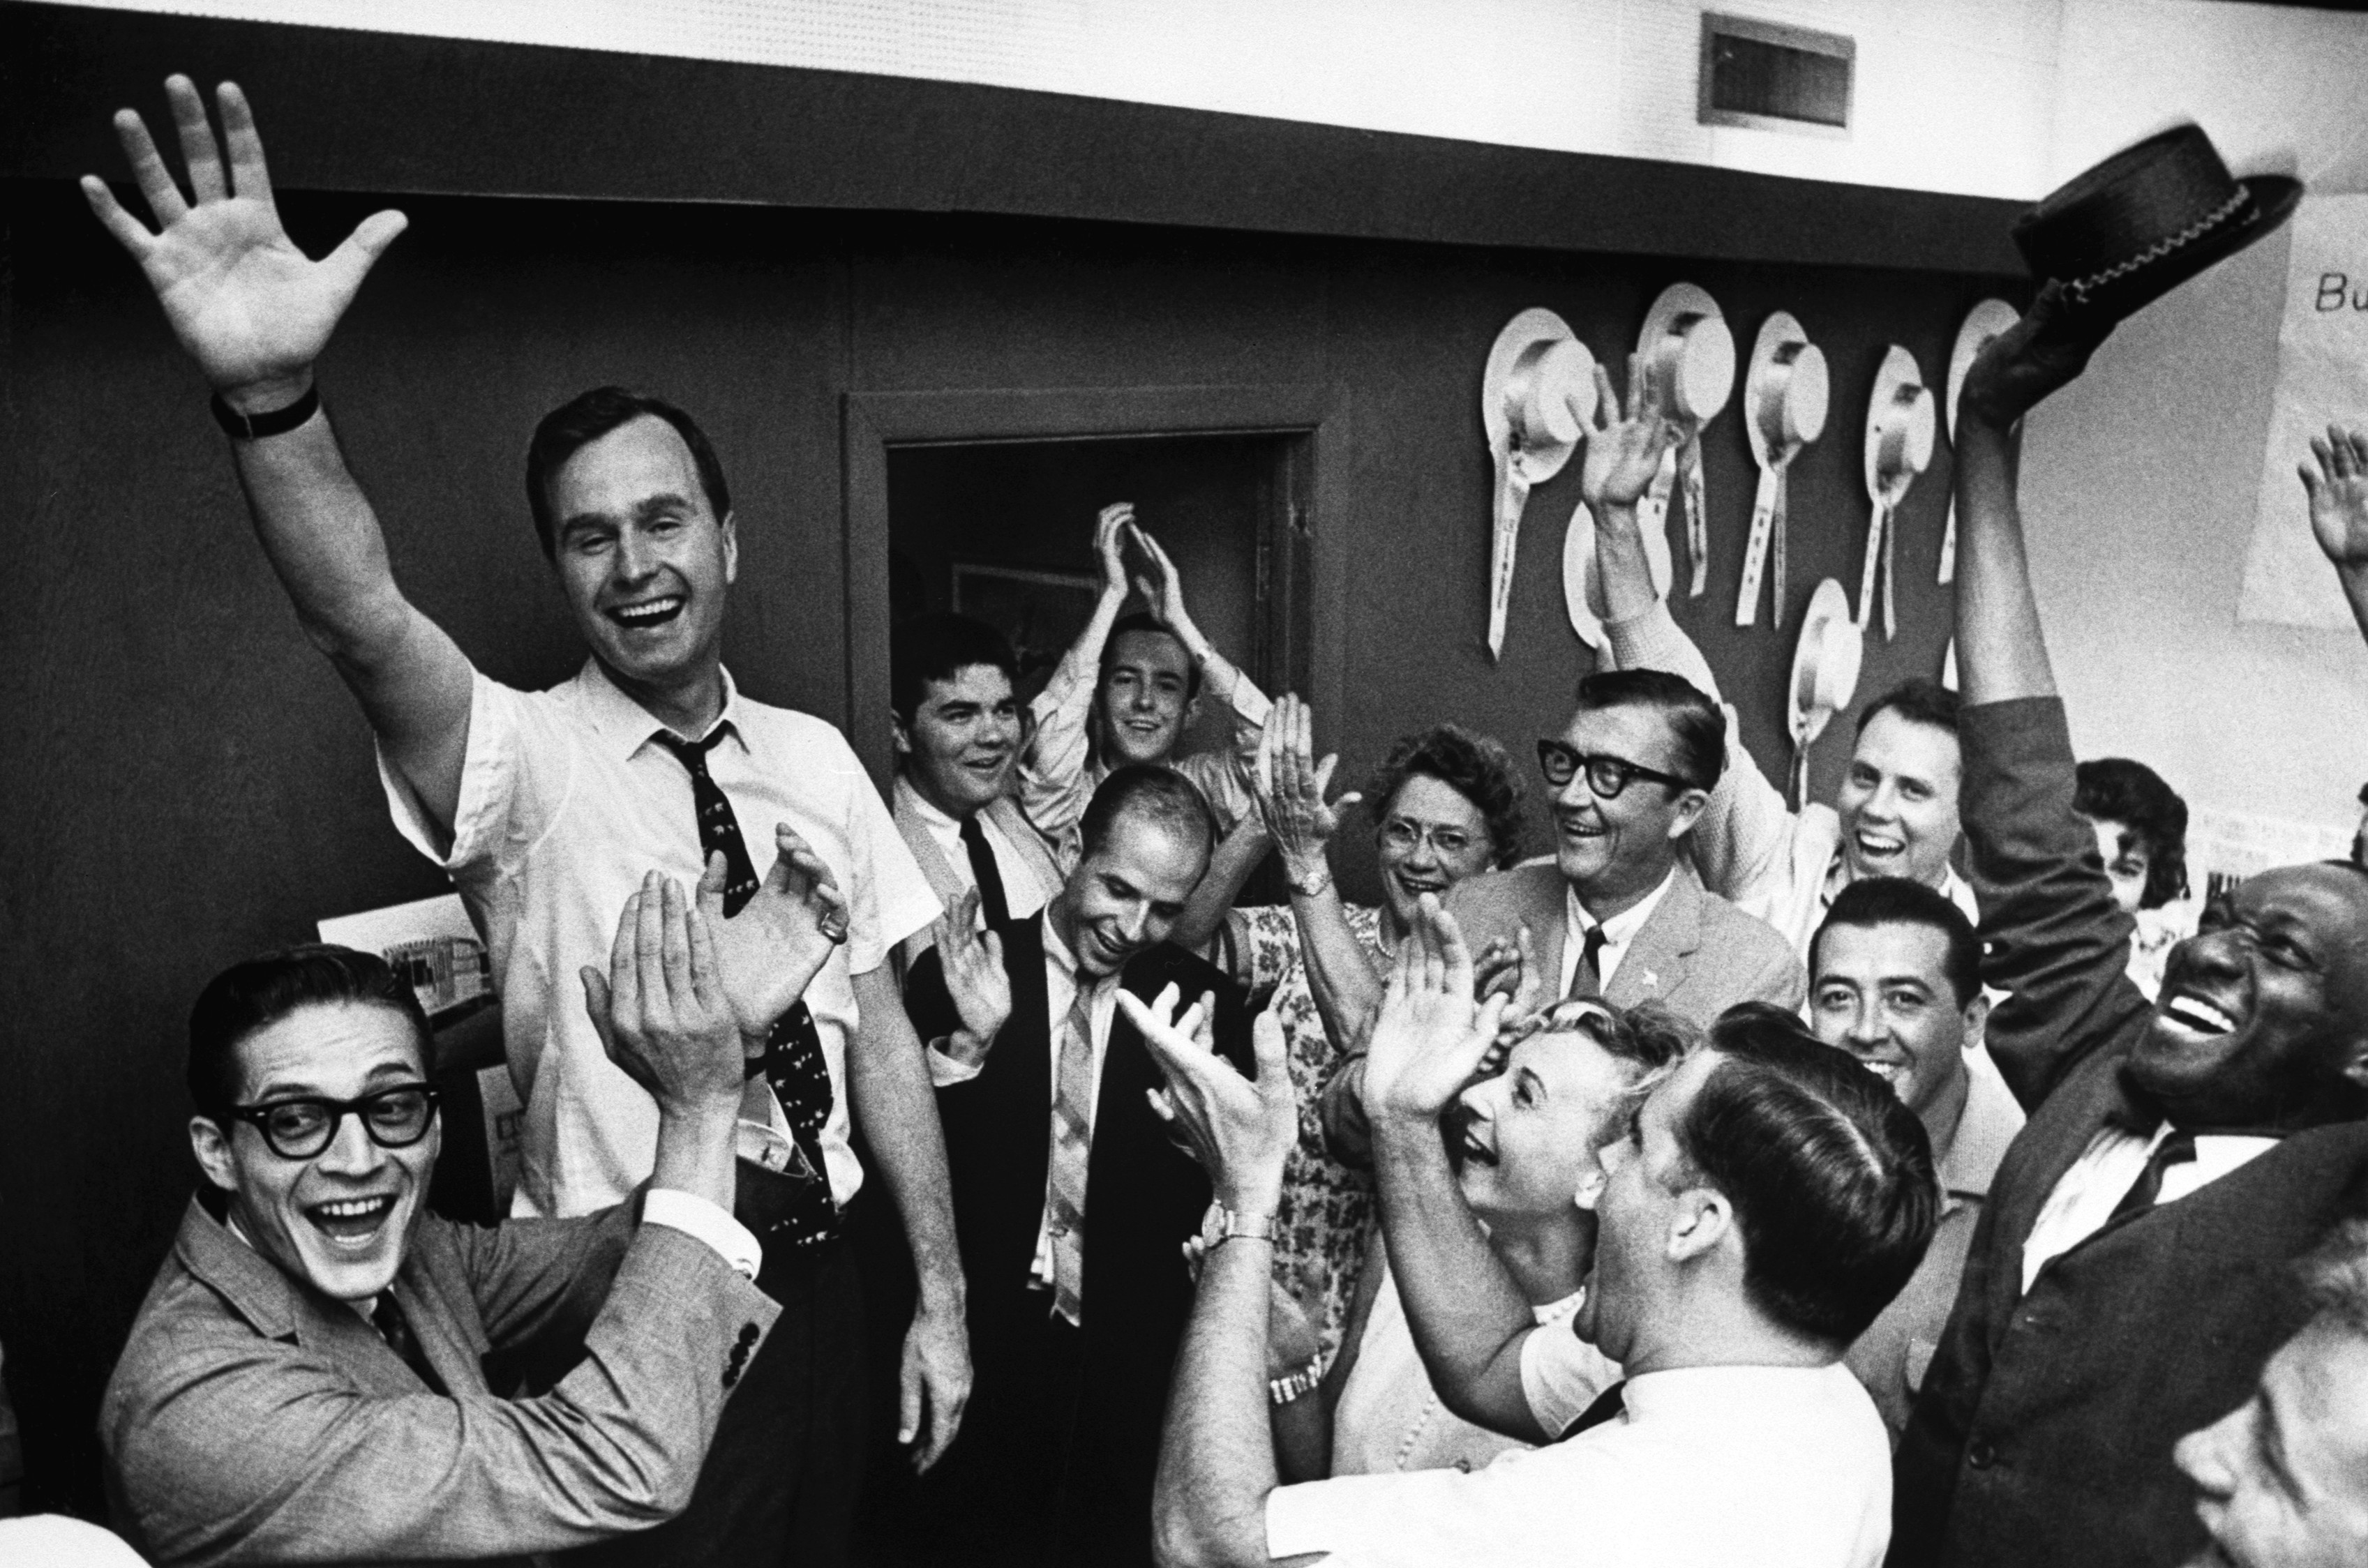 George H.W. Bush raises his arms in victory after winning an election against oilman Jack Cox for Texas Senate on June 7, 1964 in Houston, Texas.